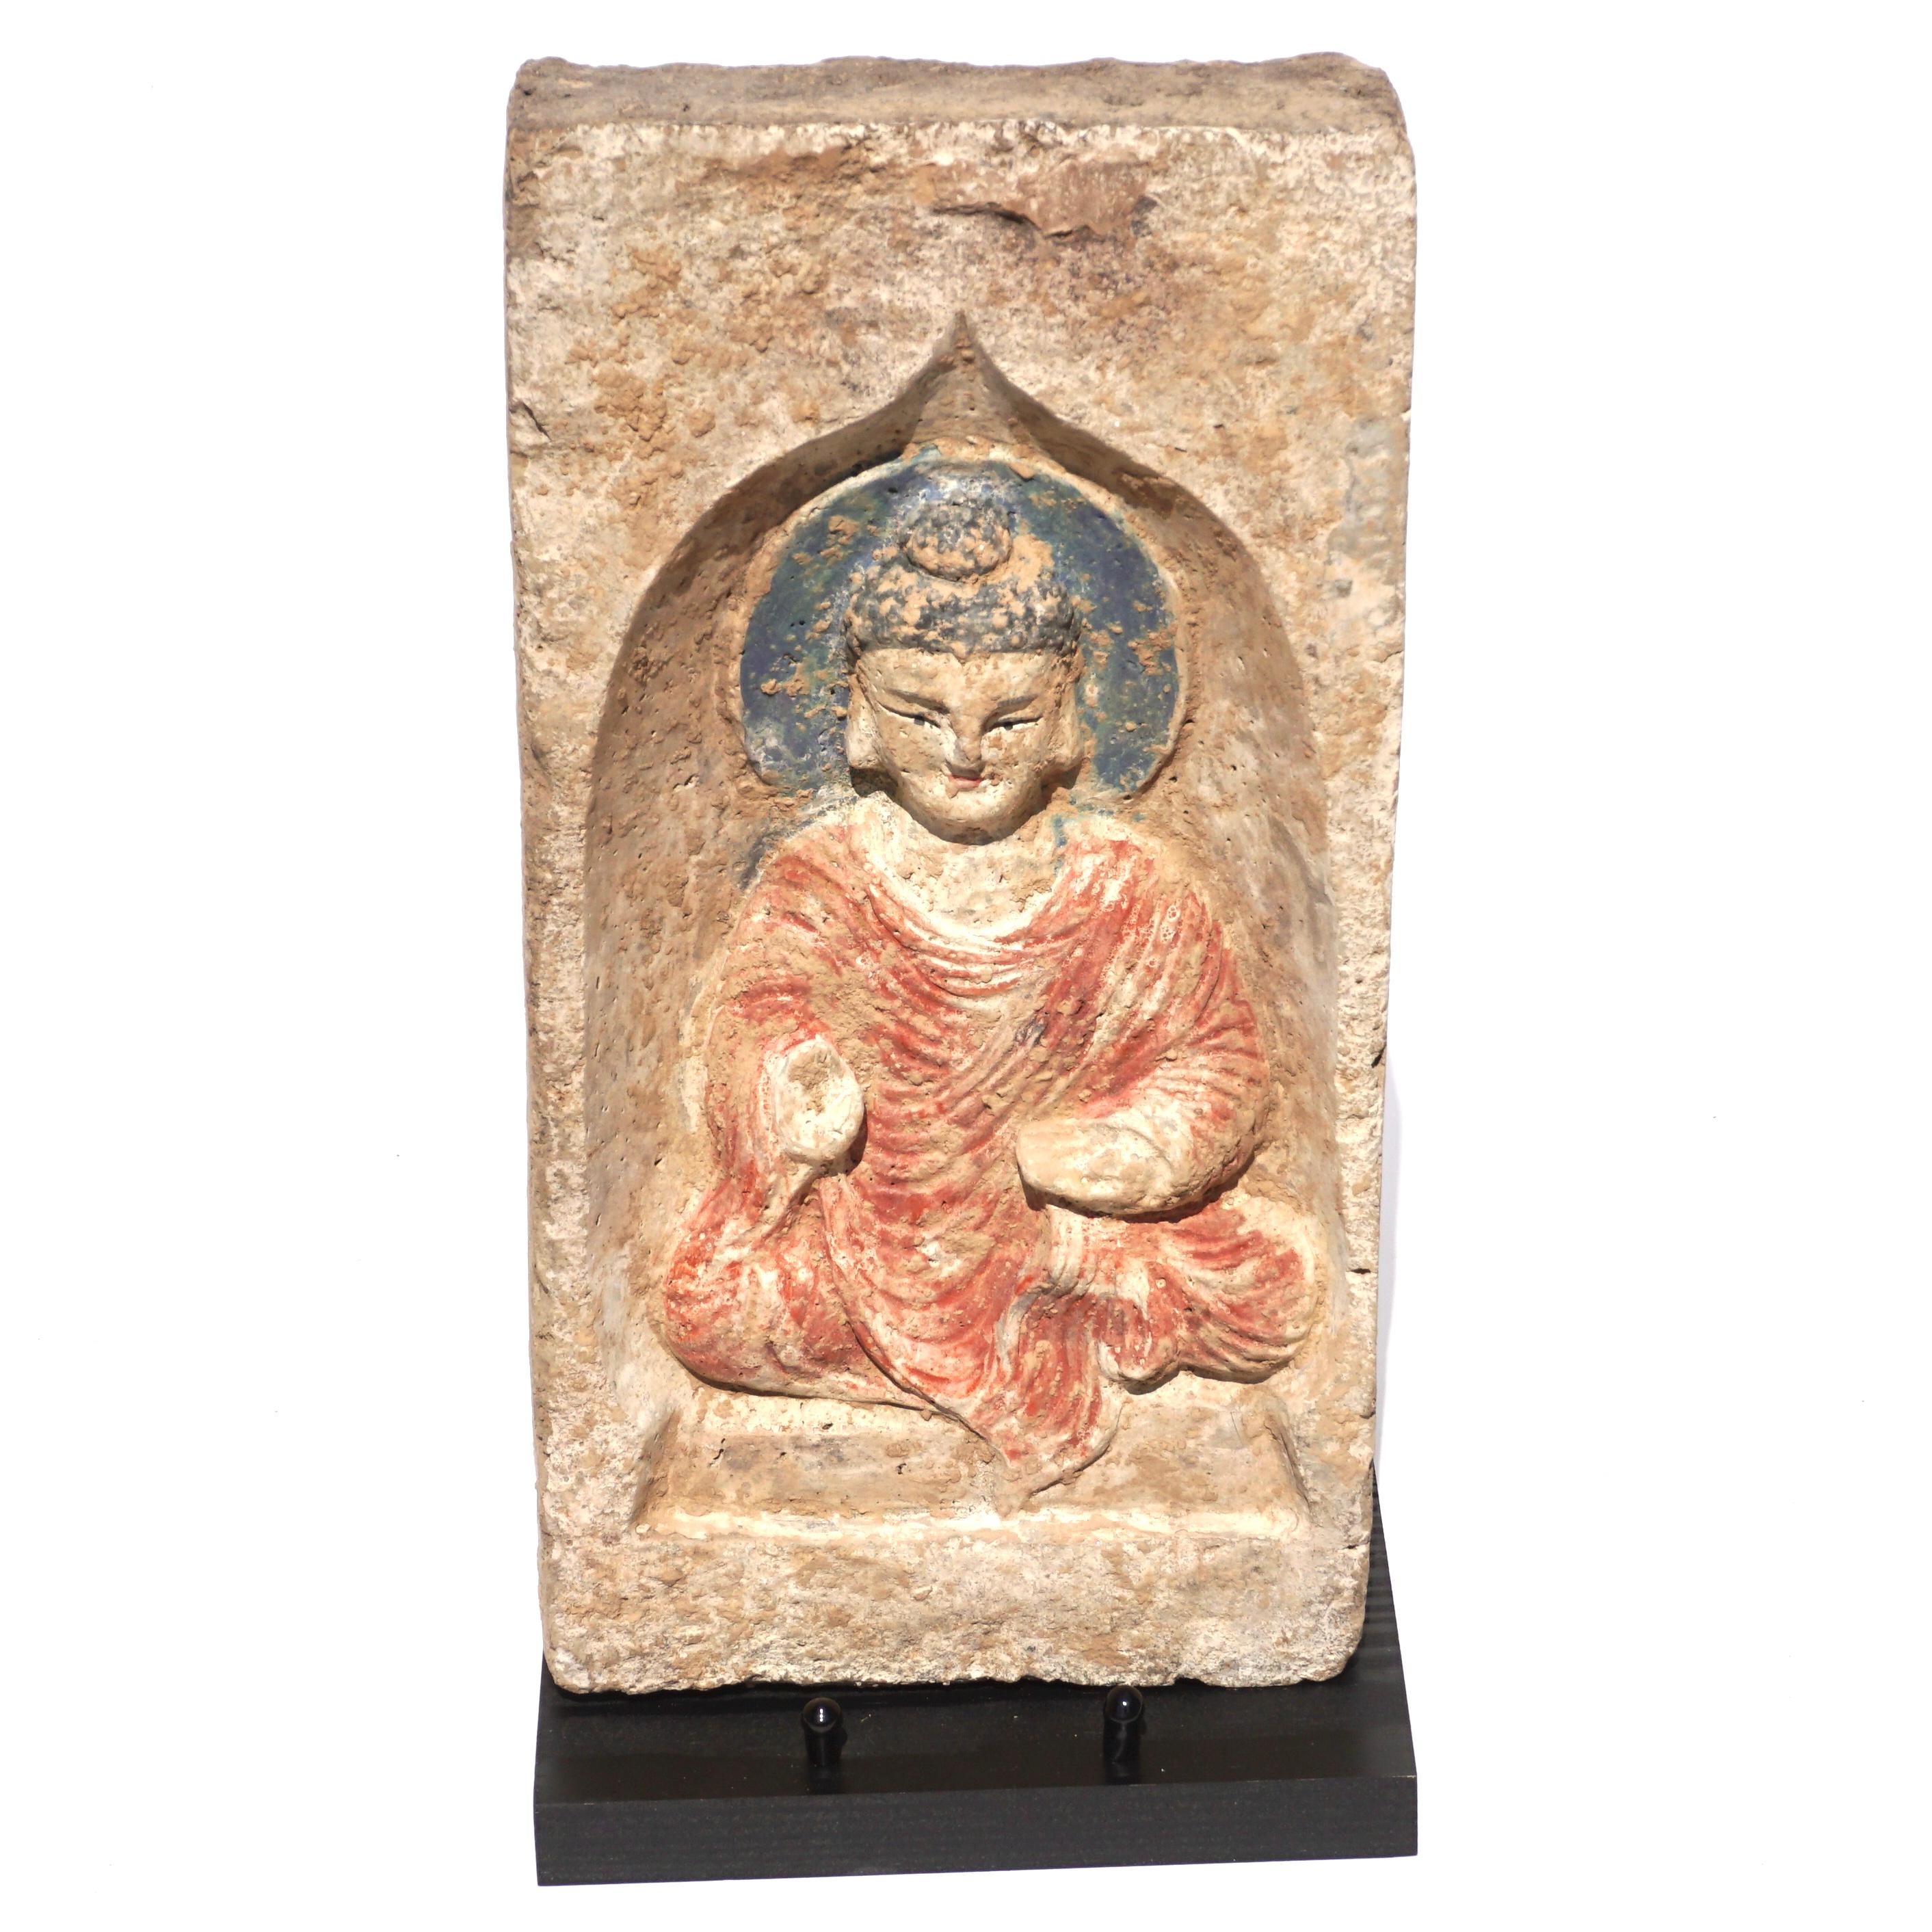 C. 386-534 AD. Chinese Northern Wei Dynasty. 

A interim Han-Tang Dynasty terracotta brick in a cream-coloured fabric featuring a beautiful depiction of a seated Buddha with a red robe, black hair and blue halo. The figure has a raised right hand,